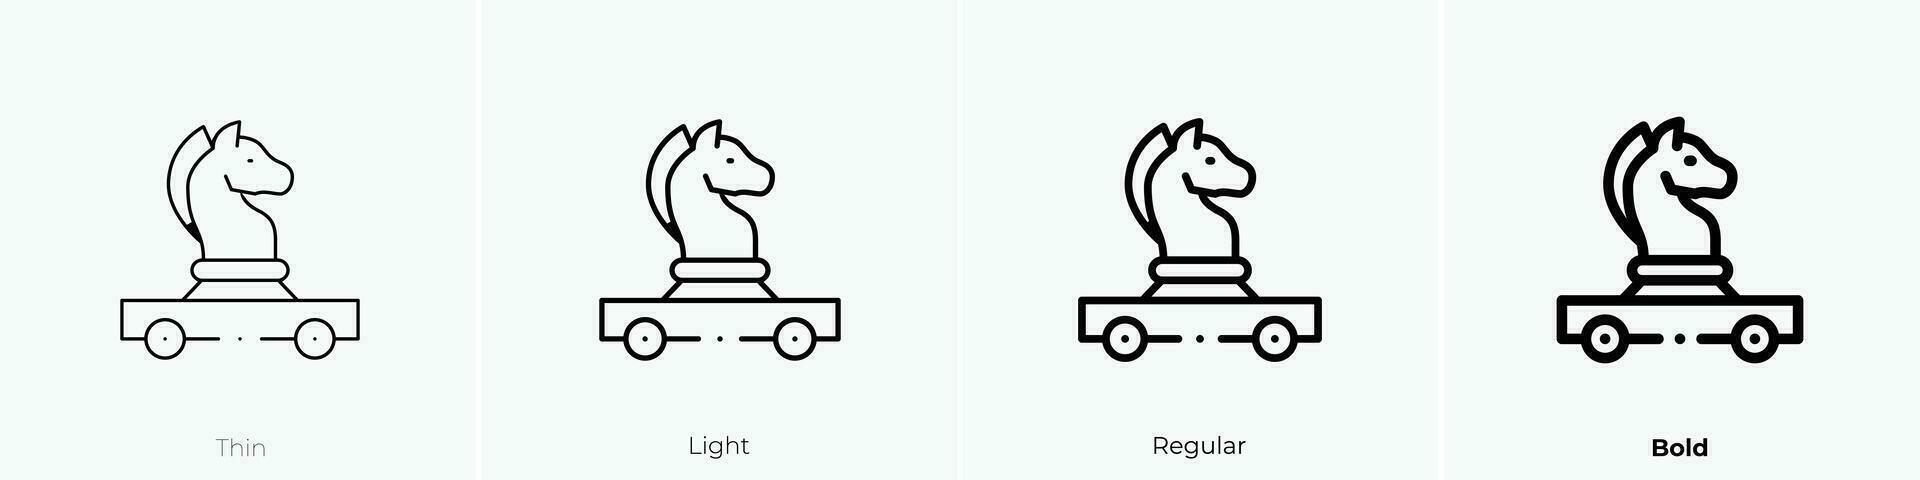 trojan horse icon. Thin, Light, Regular And Bold style design isolated on white background vector